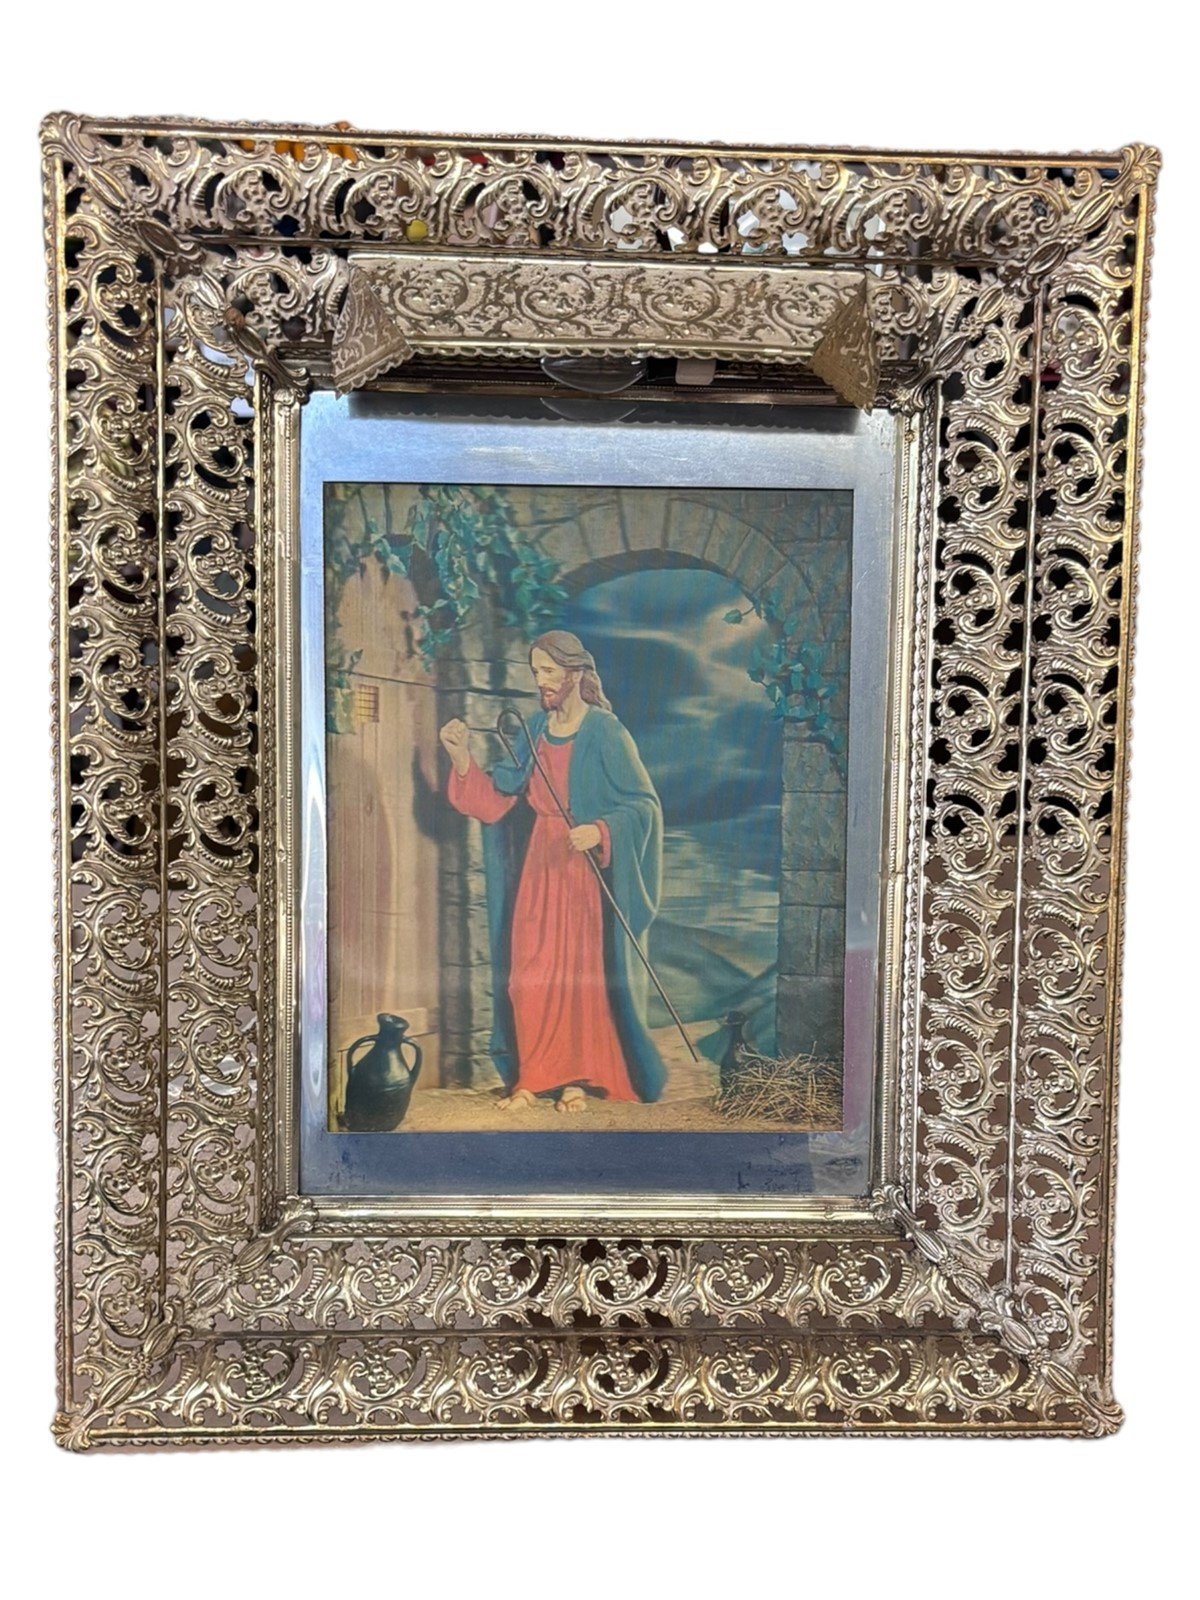 Art Deco Hollywood Regency Frame and Picture of 3D Jesus with Lit Up Frame